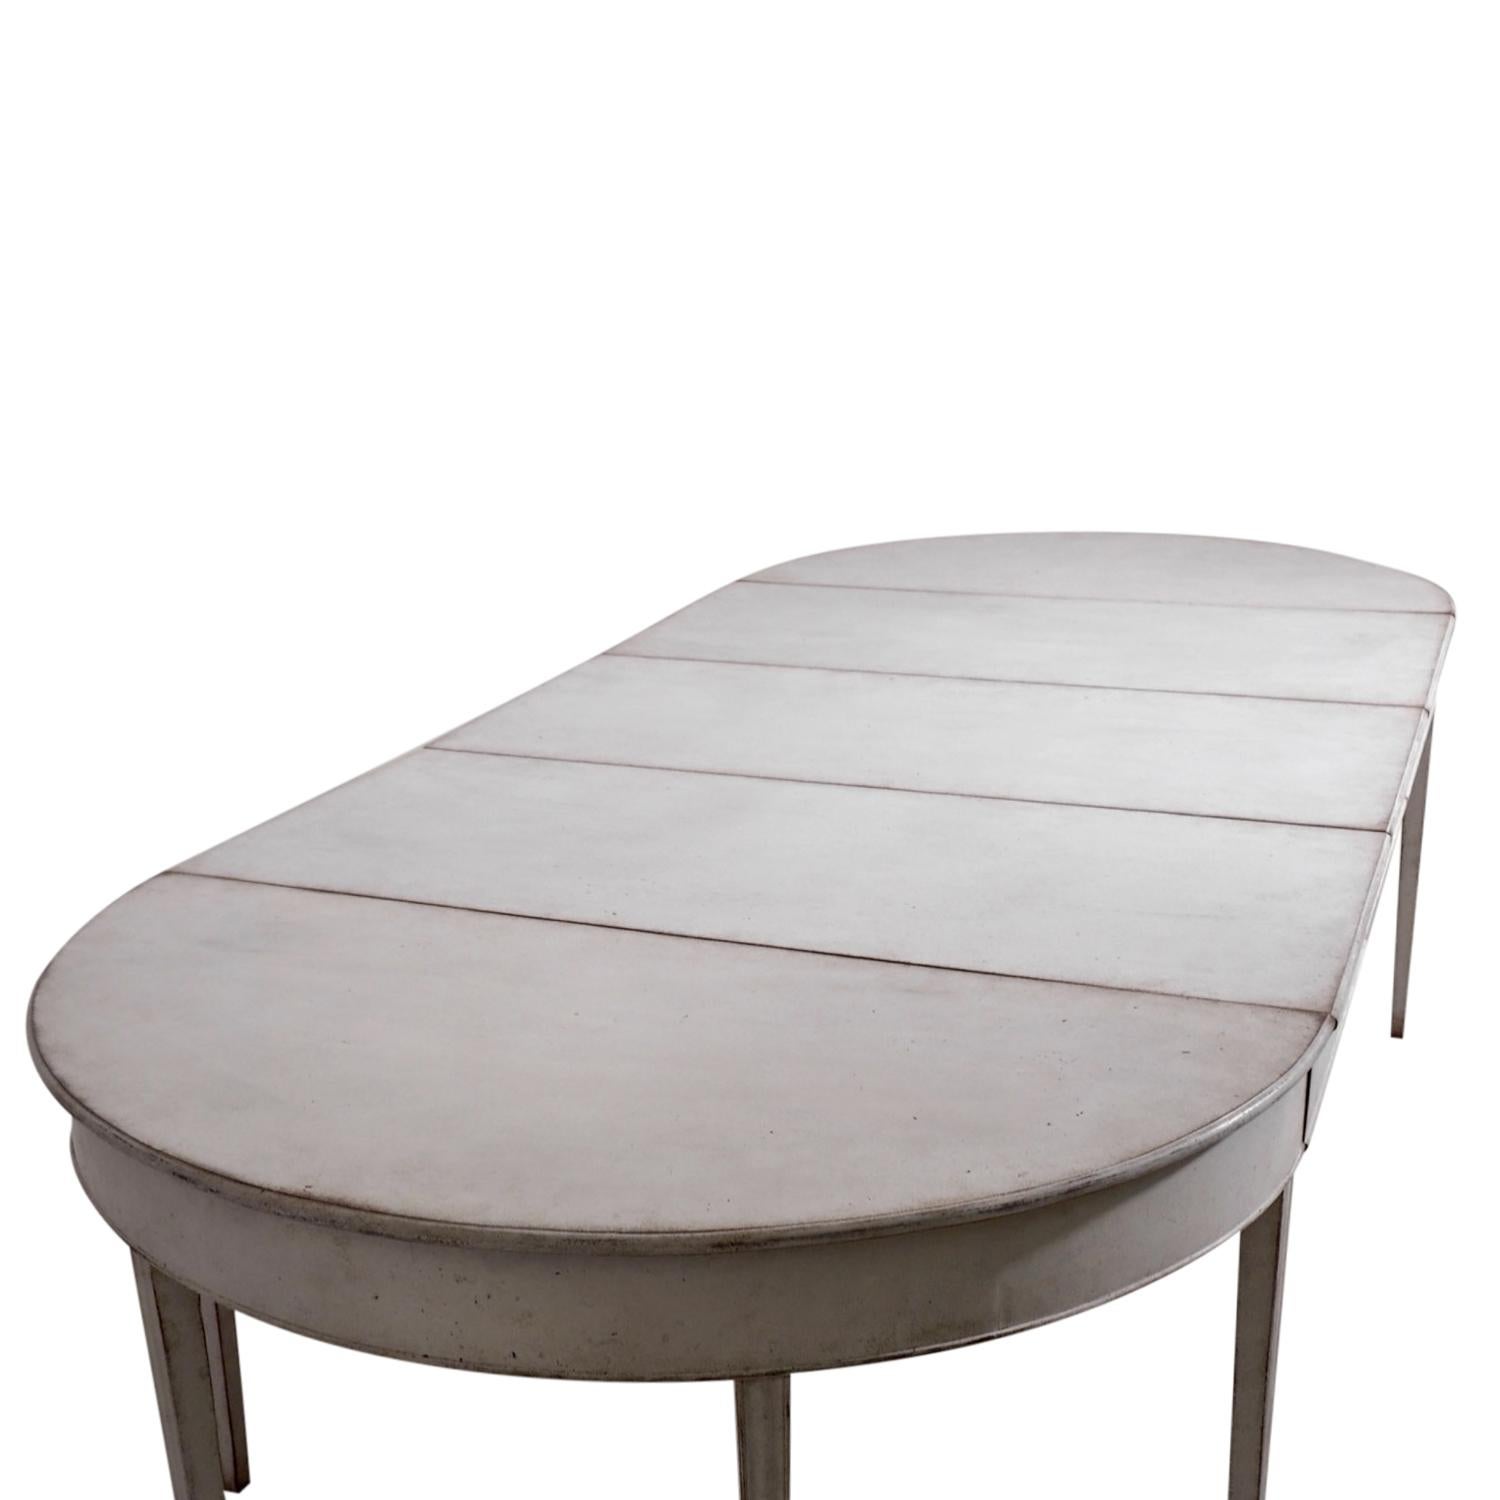 An antique Swedish Gustavian extendable dining table made of hand carved Pinewood with three leaves and apron. The light-grey, Scandinavian half round table is standing on nine straight square tapered fluted legs, detailed in the Neoclassical Greek